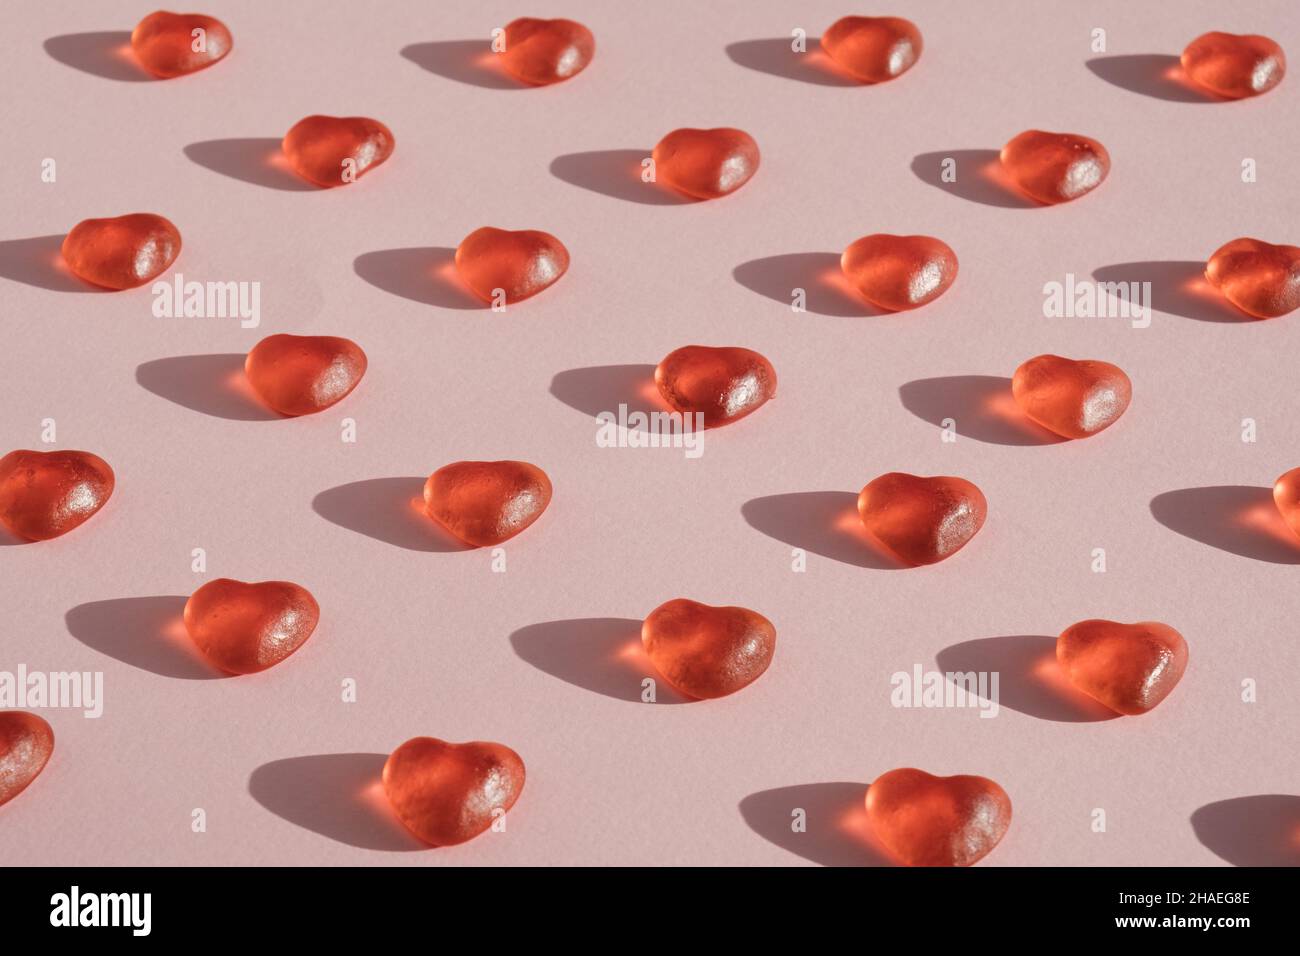 Pattern made of soft candy hearts arranged on light pink background. Love, affection minimal concept. Stock Photo